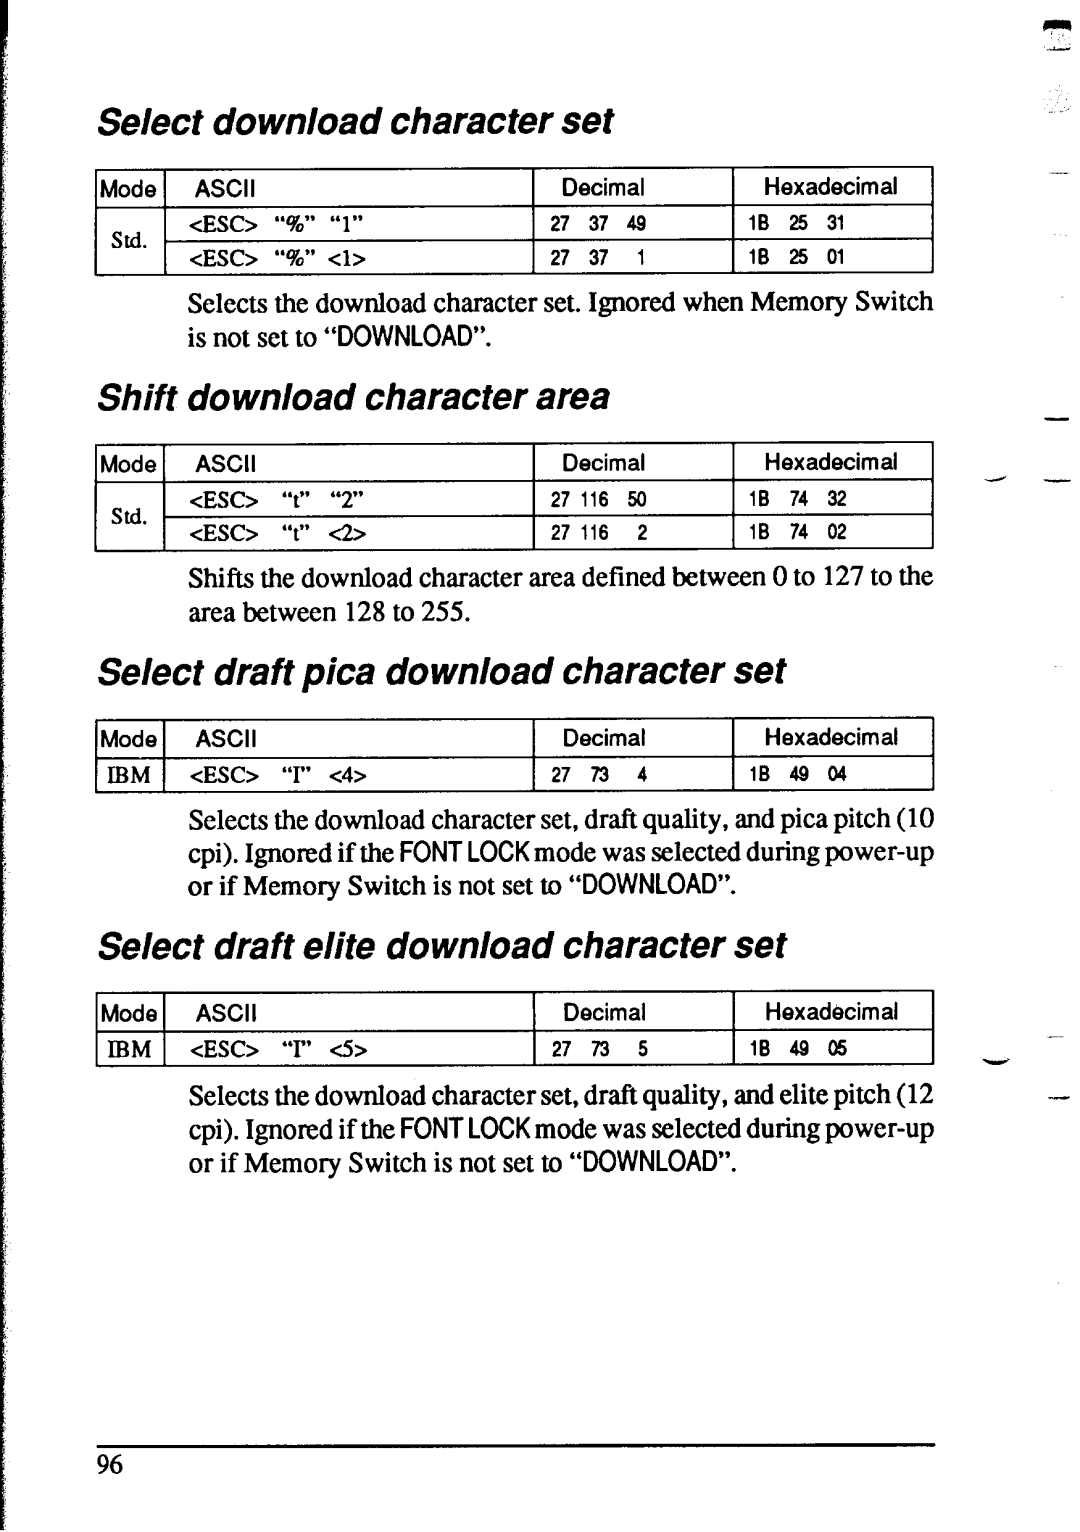 Star Micronics XR-1020, XR-1520 manual Se/ect download character set, Shift download character area 